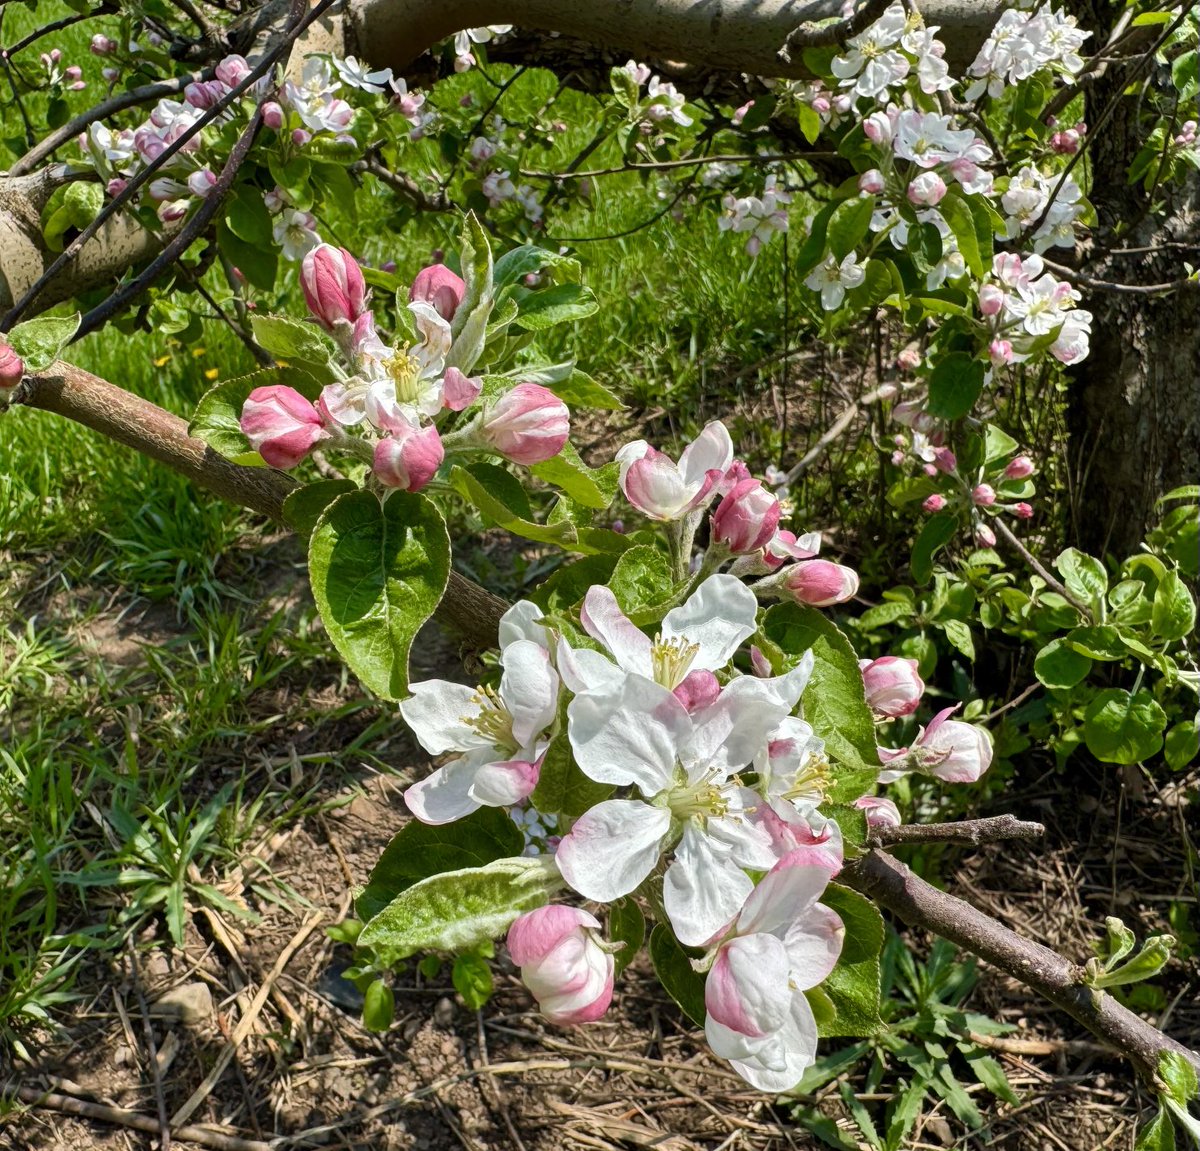 Apple blossoms starting to pop in the orchards. @LymanOrchards⁩ #Middlefield #AprilSpringBlooms